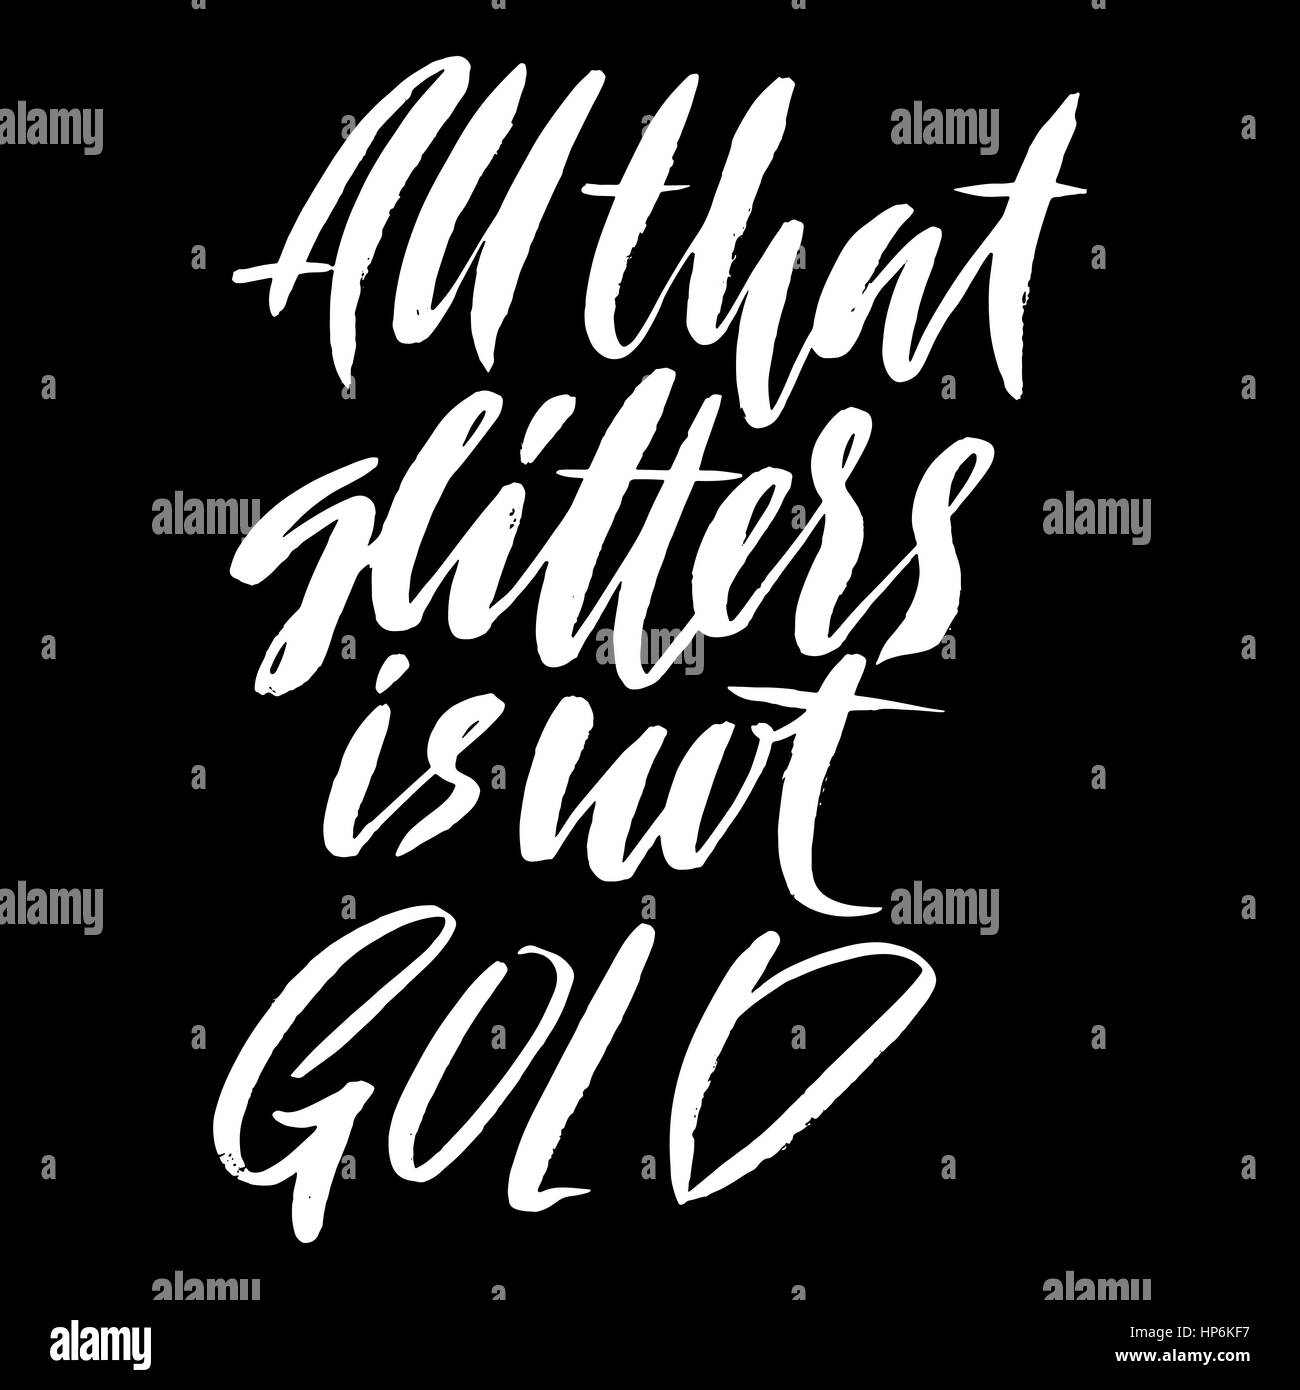 Hand drawn vector lettering. Motivating modern calligraphy. Inspiring hand lettered quote. Home decoration. Printable phrase. All that glitters is not gold Stock Vector